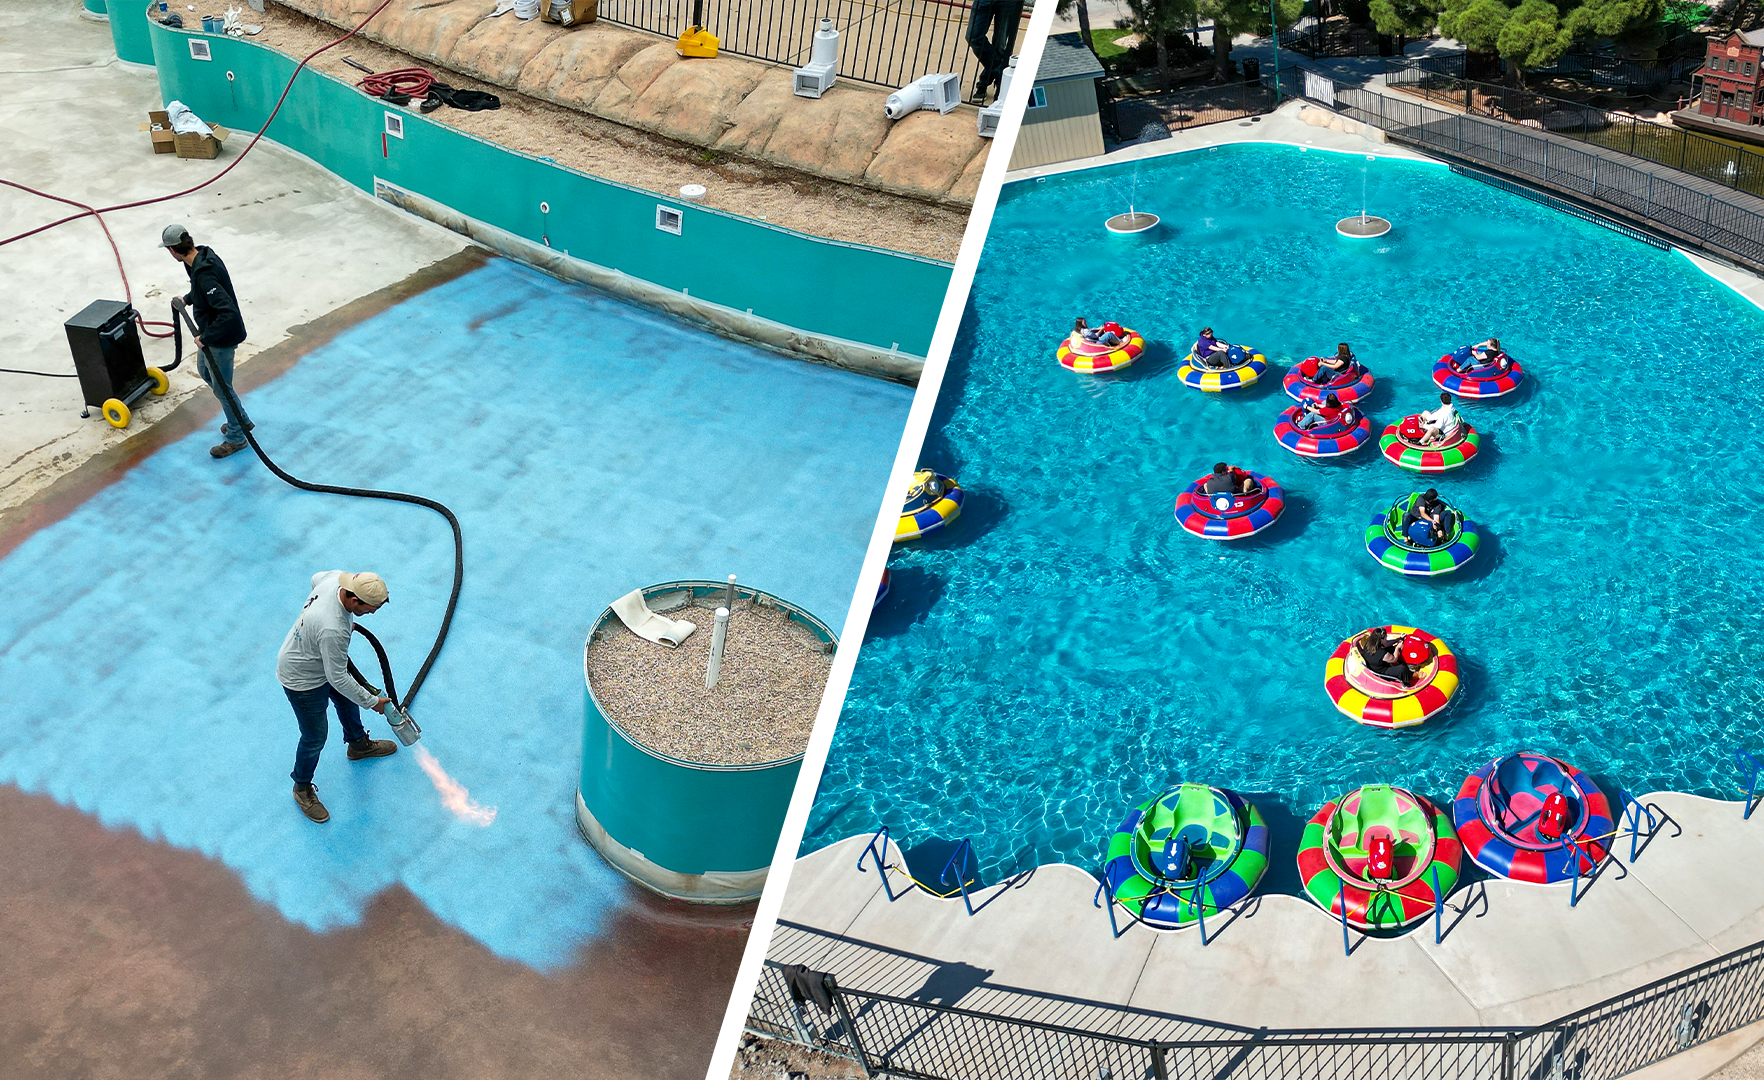 A comparison photo. Left photo: A worker applying ecoFINISH coating to a pool. The worker is seen using tools to carefully coat the pool's surface with ecoFINISH. Right photo: The finished pool with water and bumper boats floating on the surface. The ecoFINISH coating provides a smooth and durable finish to the pool.